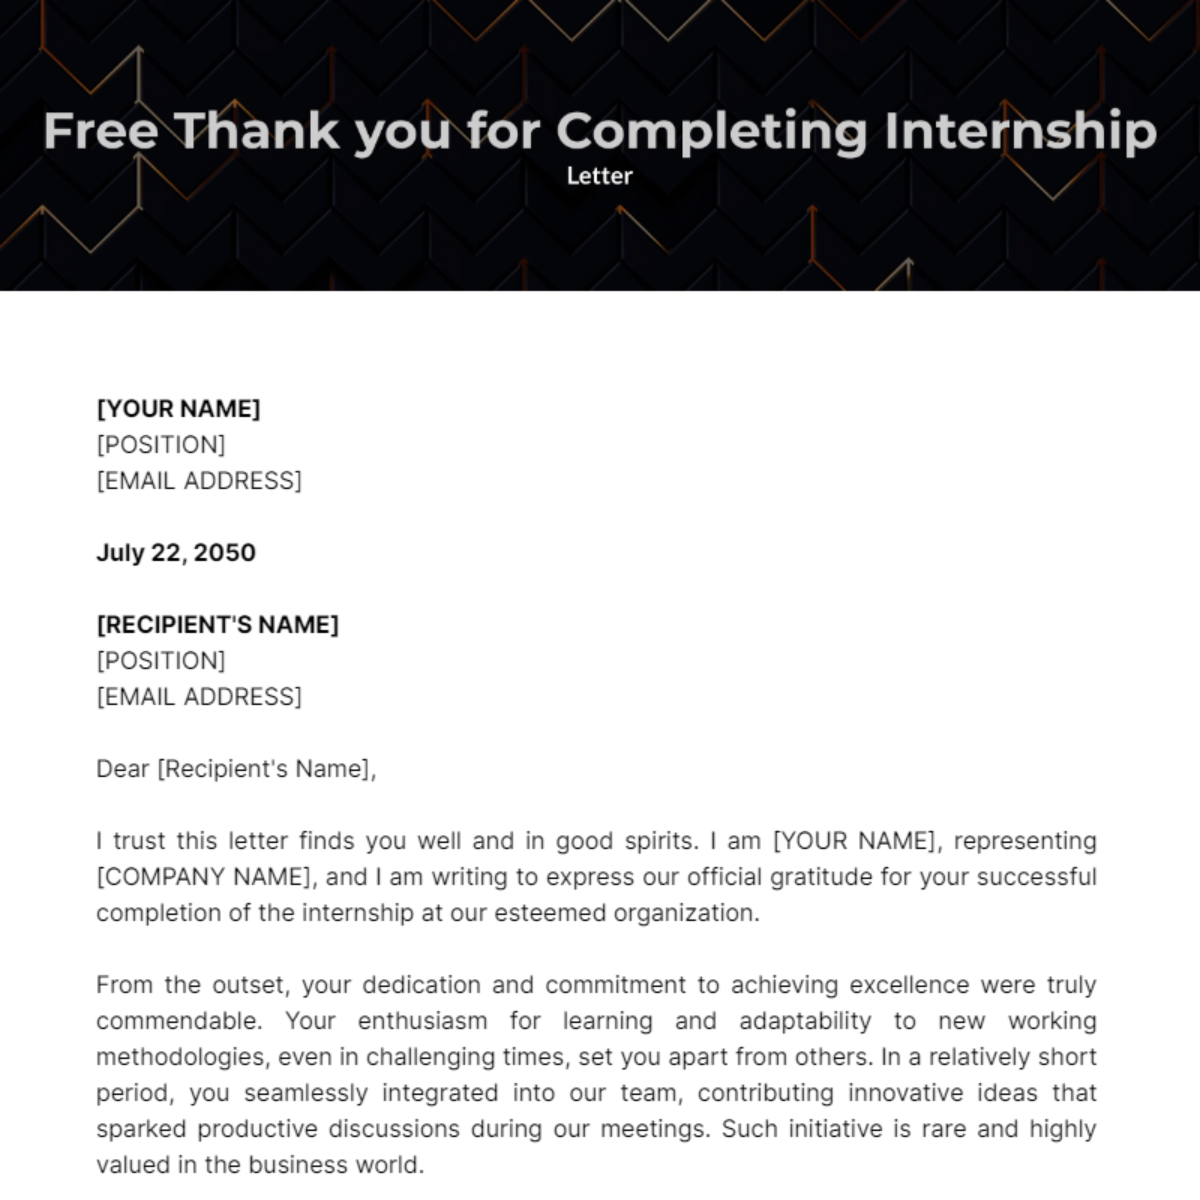 Thank you Letter for Completing Internship Template